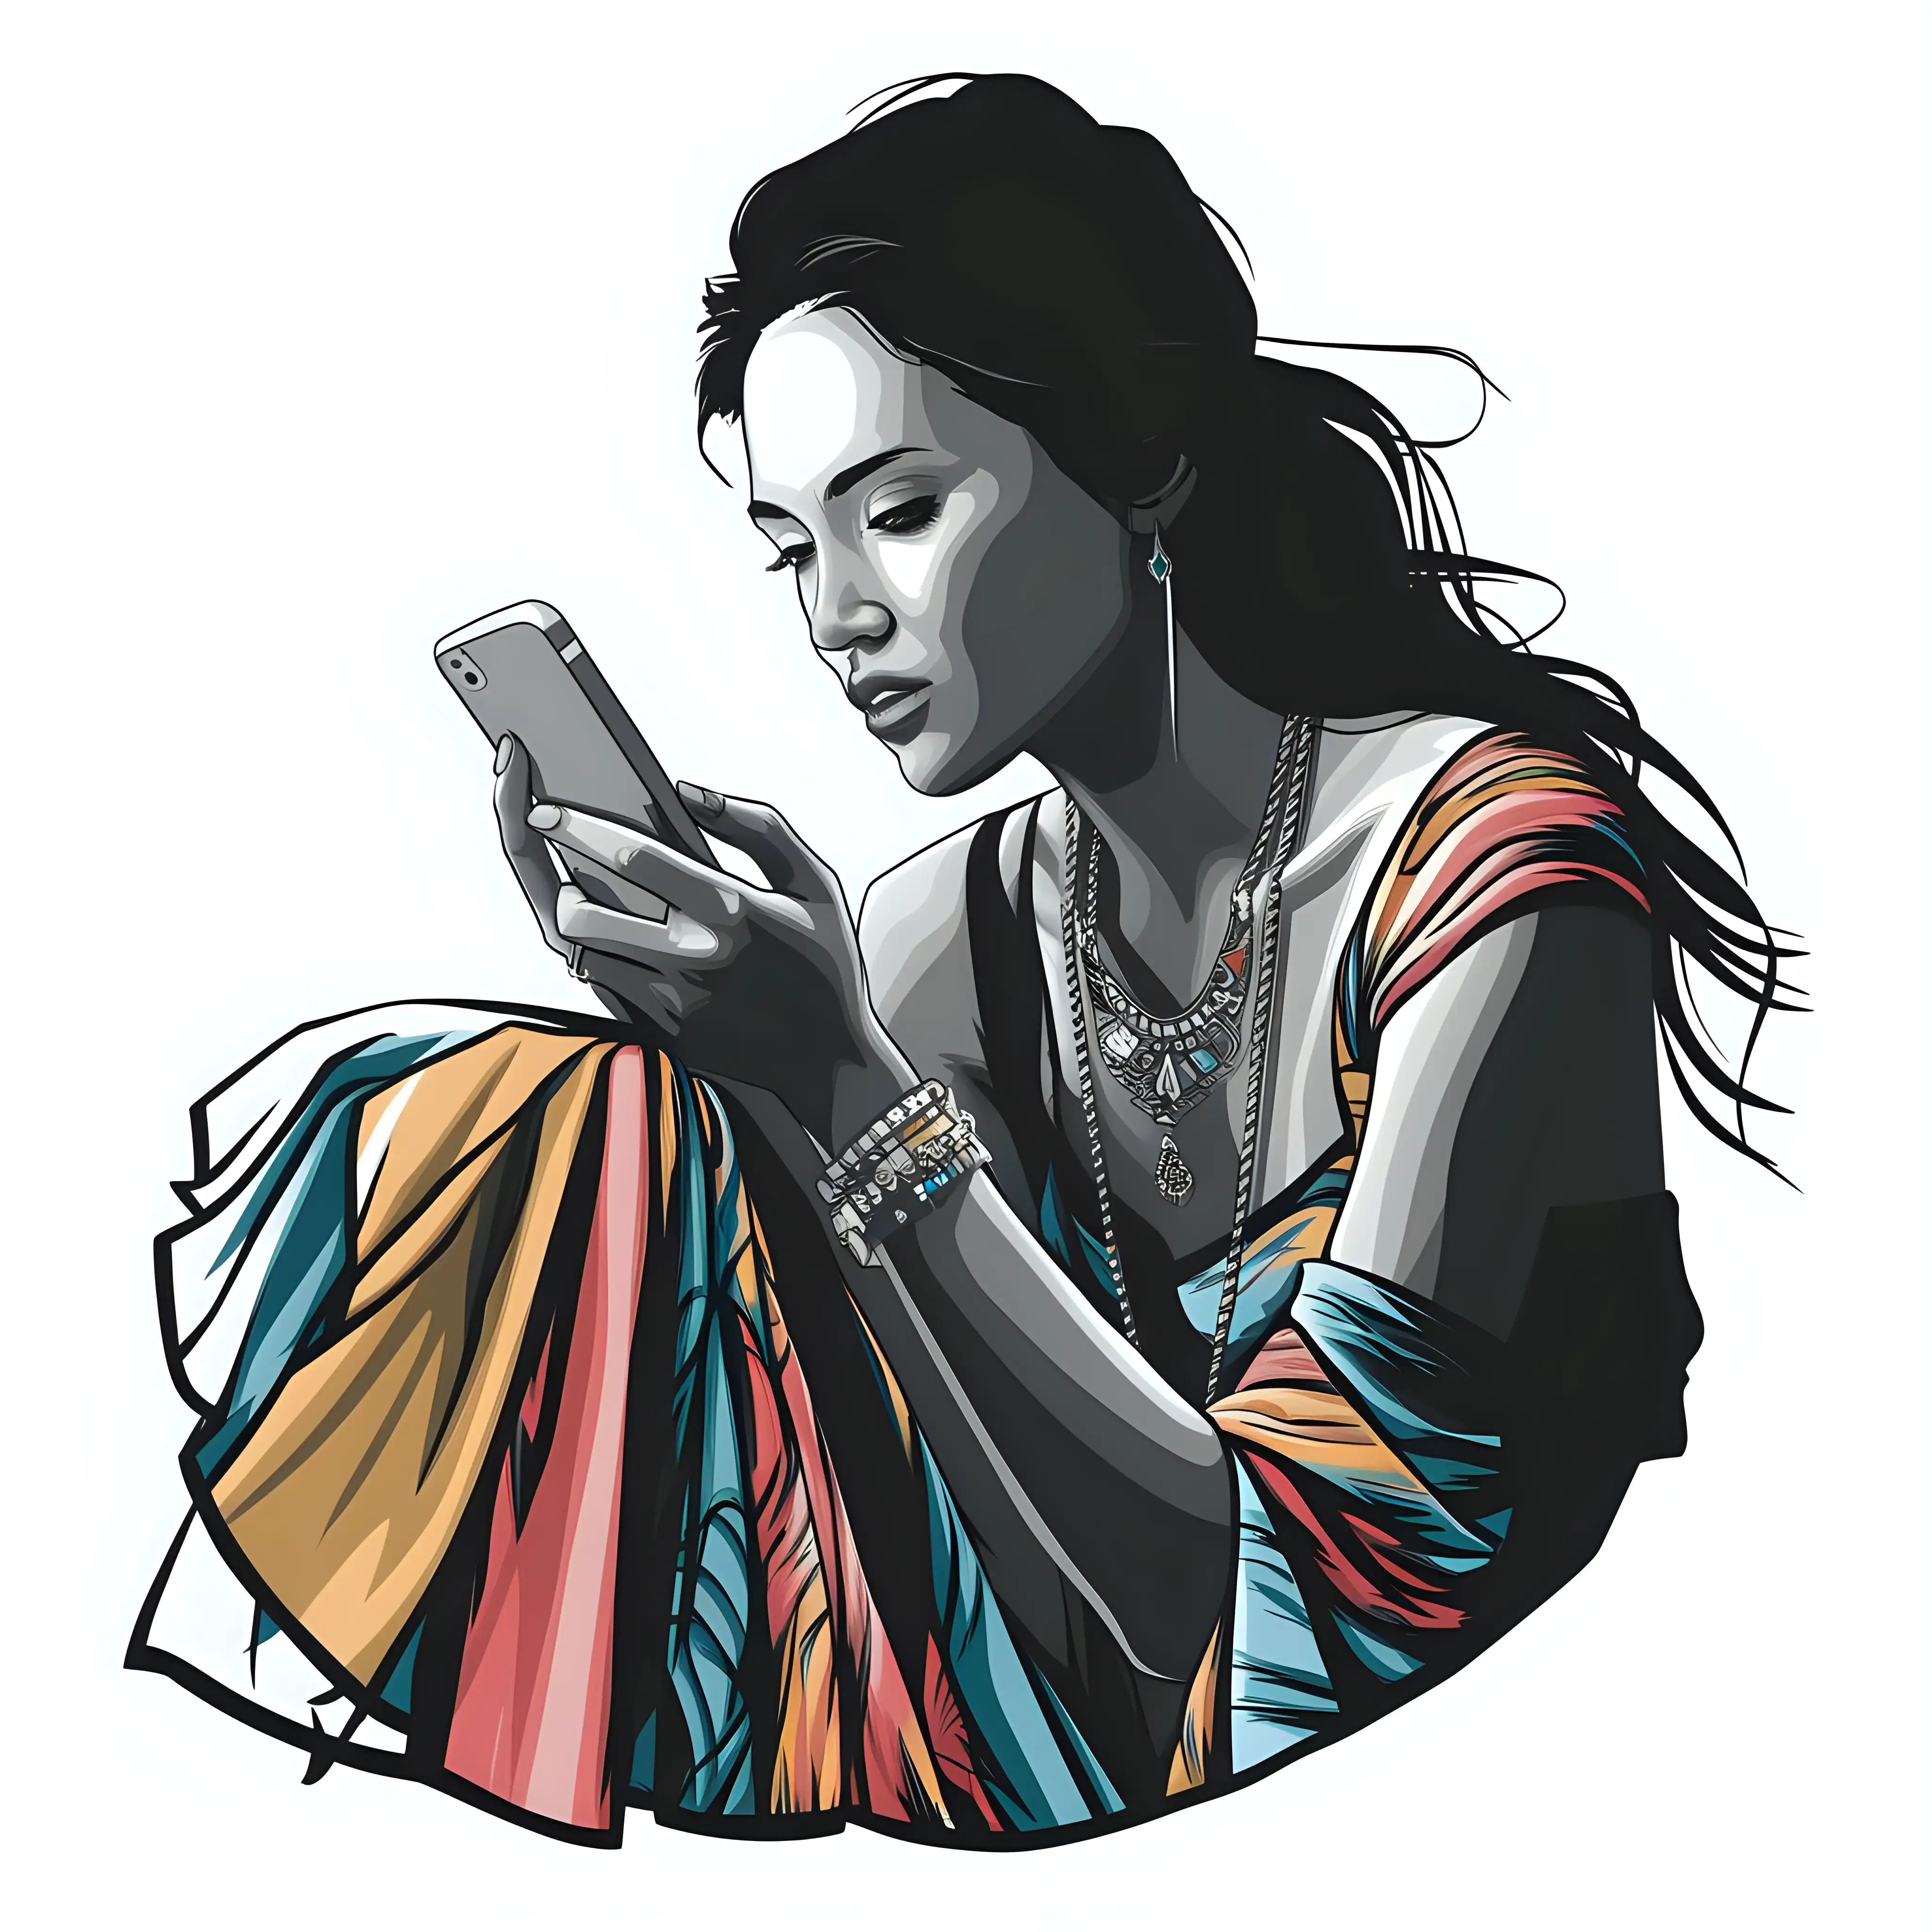 Graphic T-shirt design.  Vectorised with solid outlines.

lady concentrating on phone

Style: bohemian
Mood:  boho chic
Solid White Background